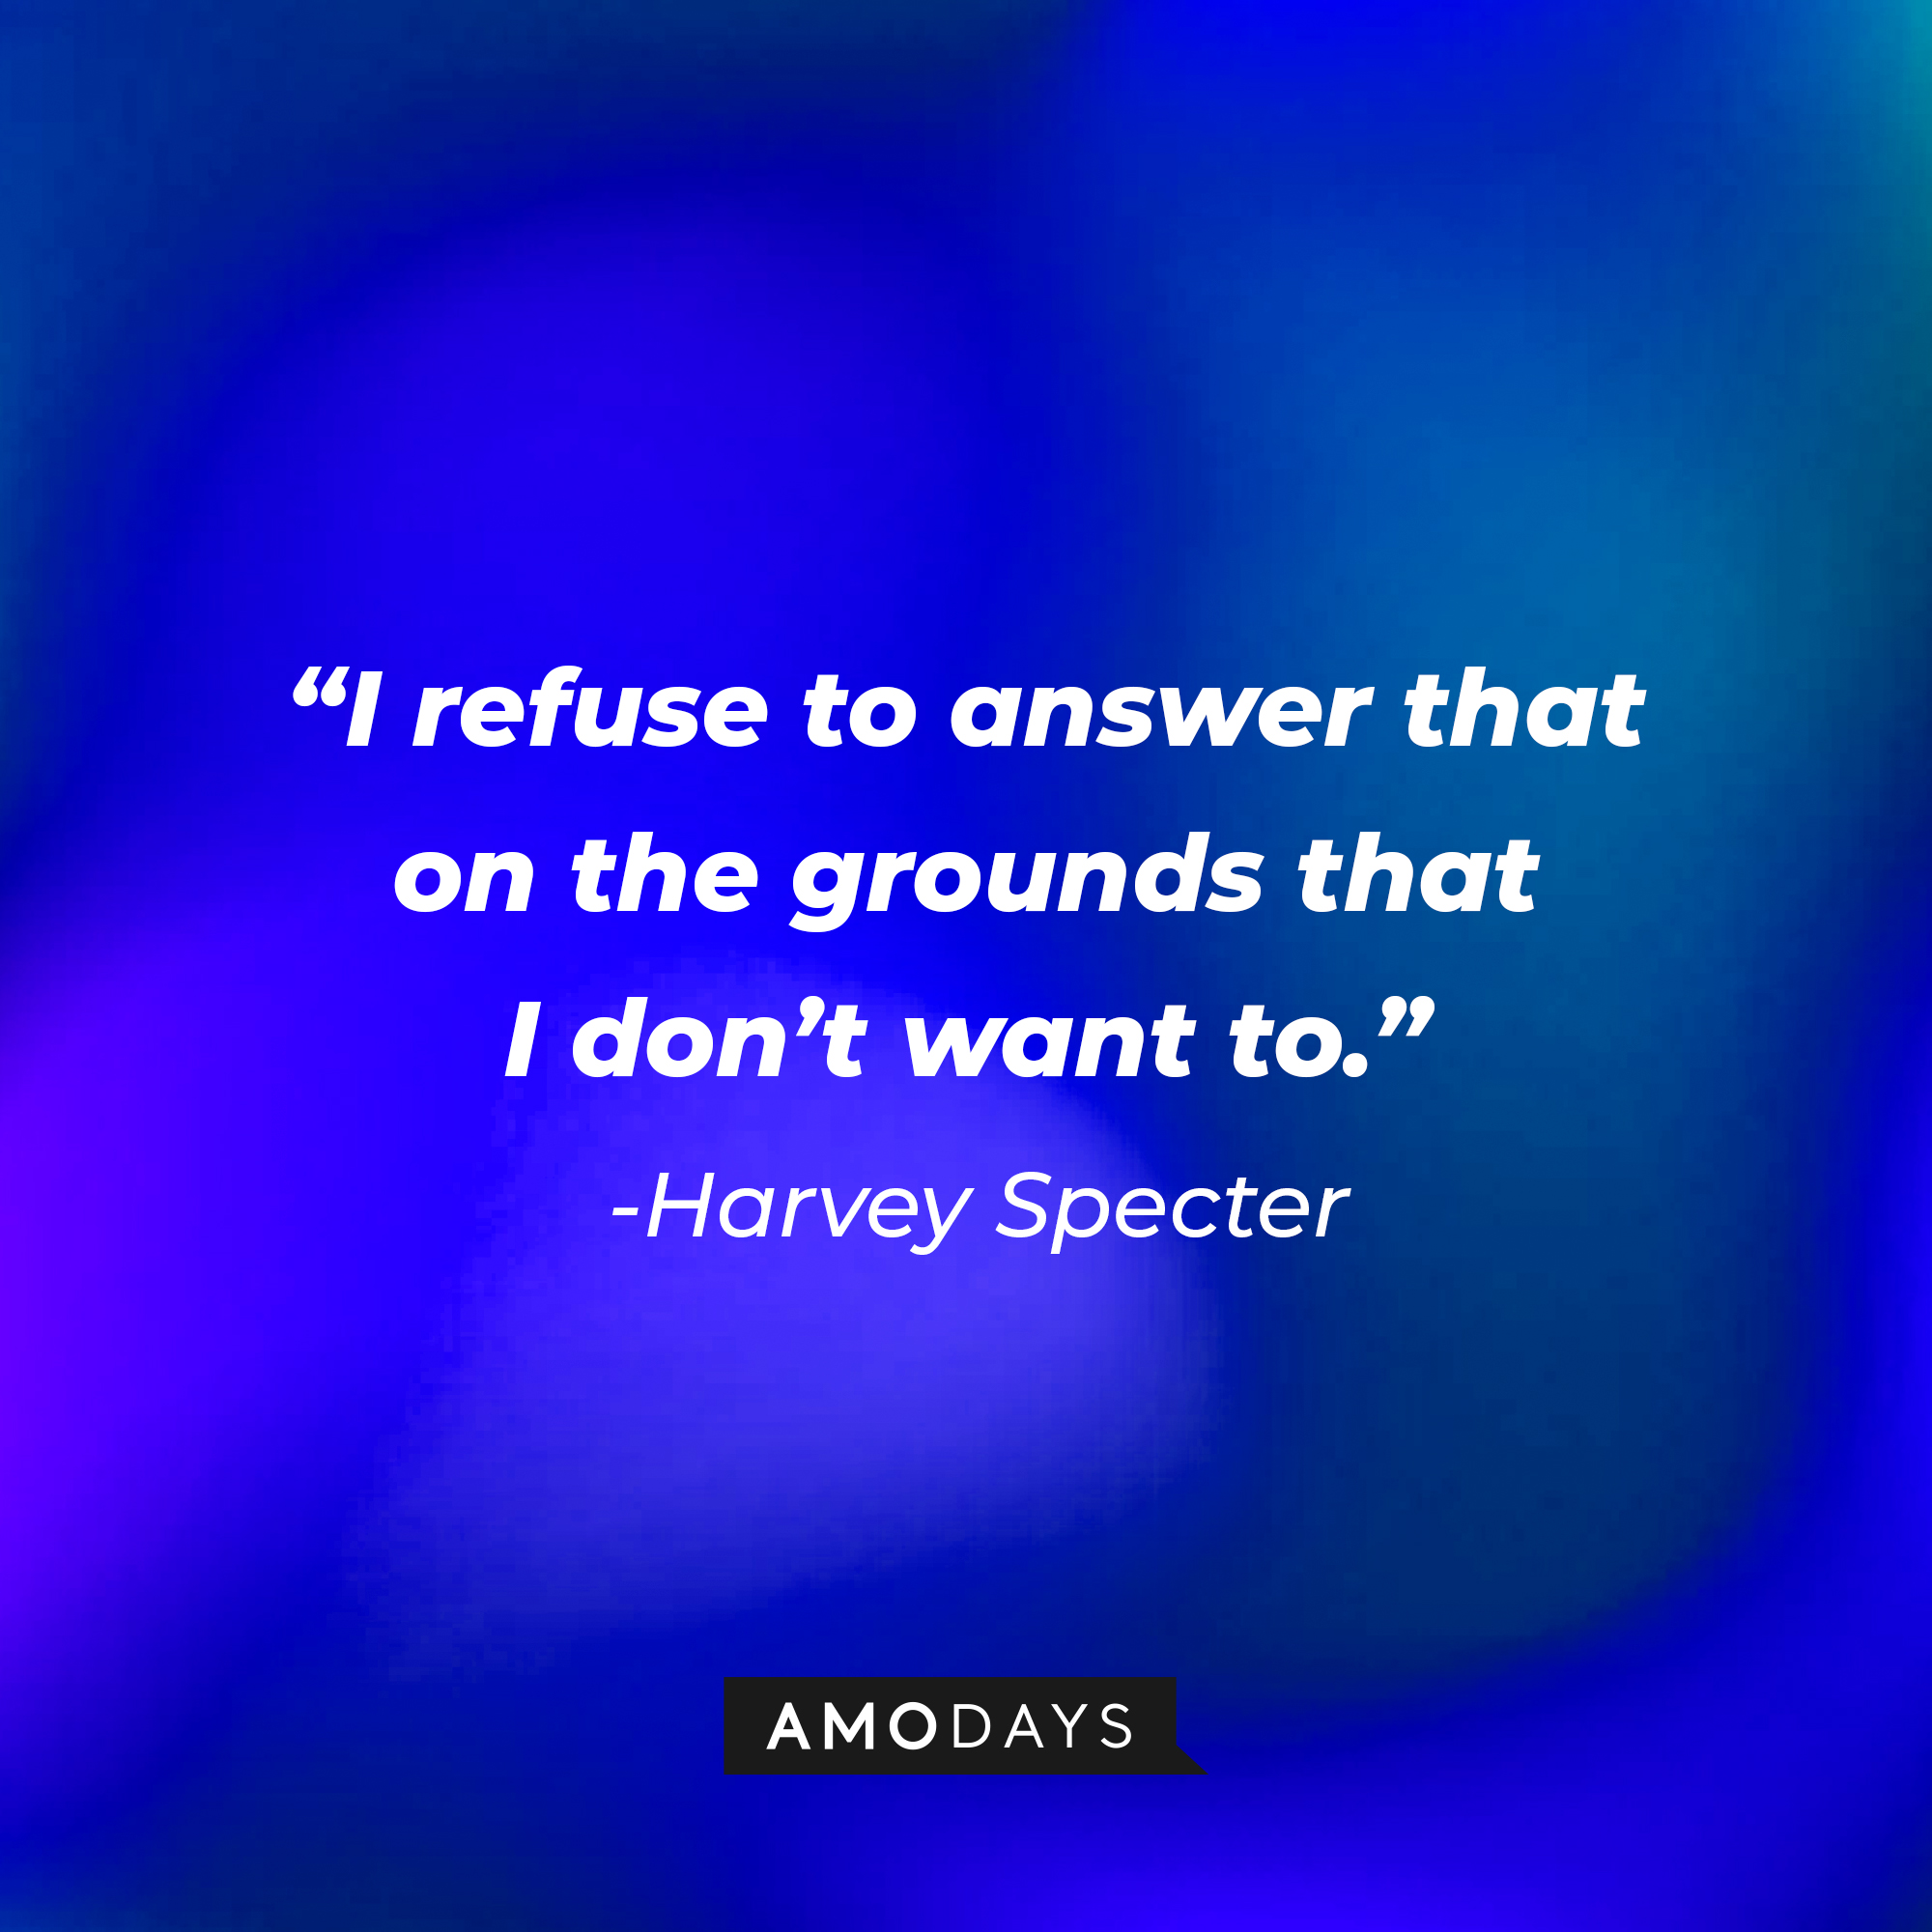 Harvey Specter's quote from "Suits" : "I refuse to answer that on the grounds that I don't want to." | Source: Amodays